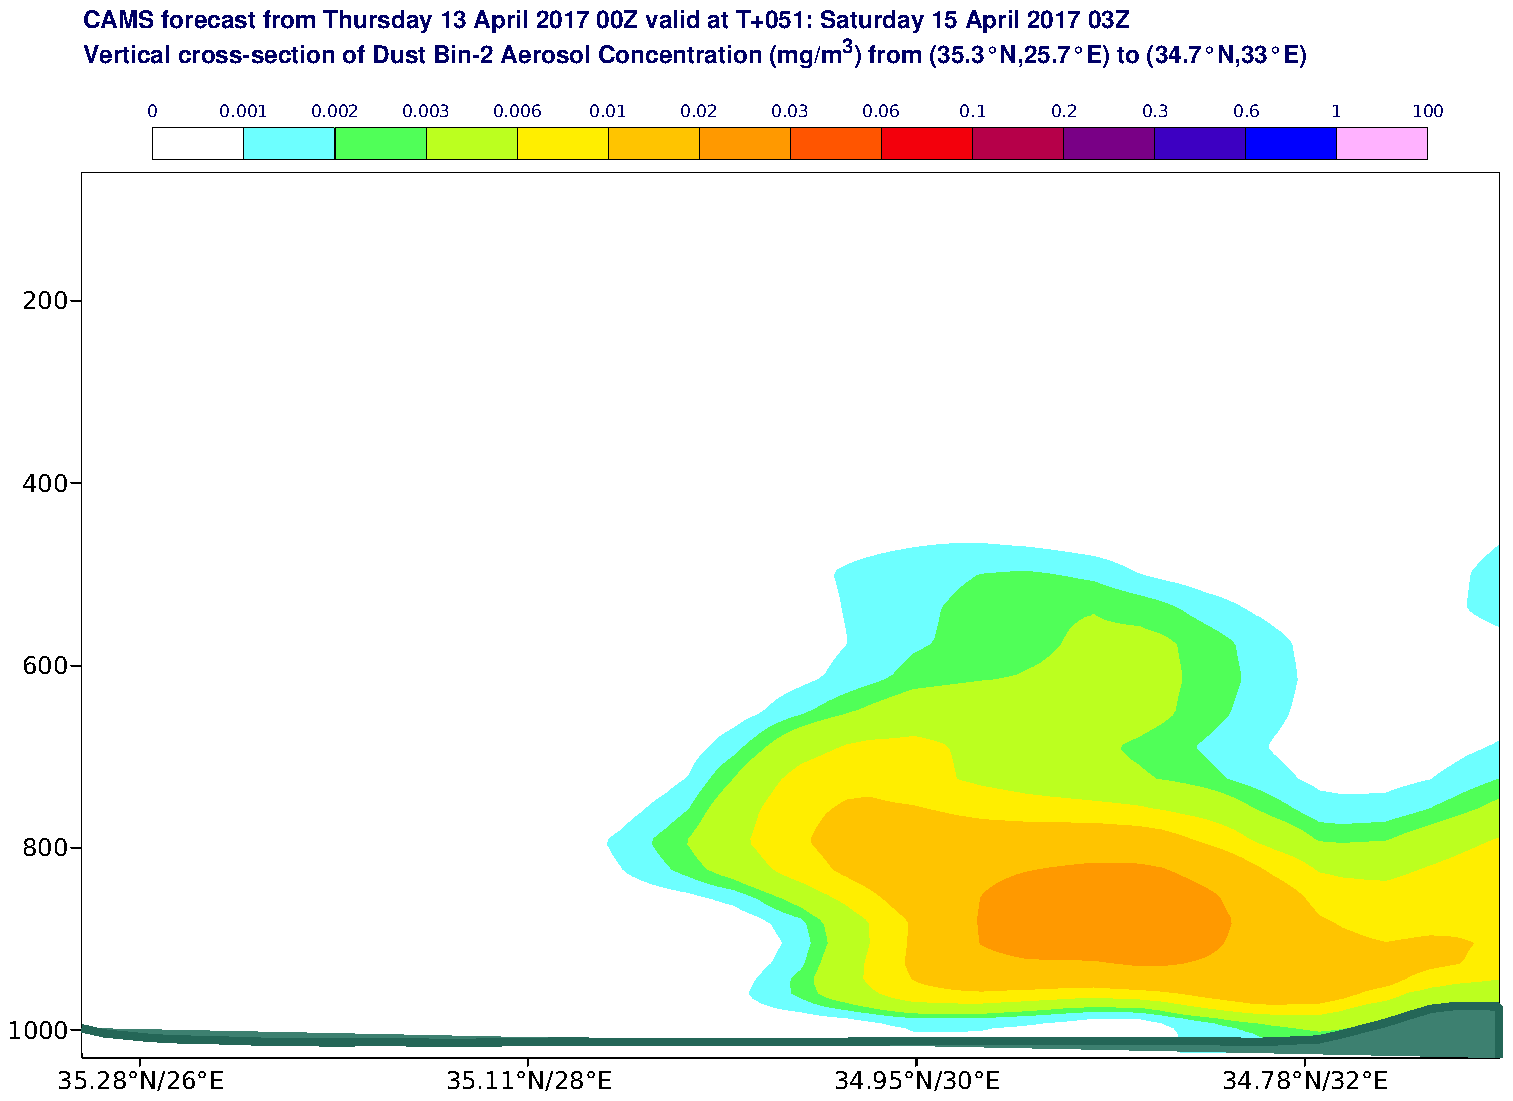 Vertical cross-section of Dust Bin-2 Aerosol Concentration (mg/m3) valid at T51 - 2017-04-15 03:00